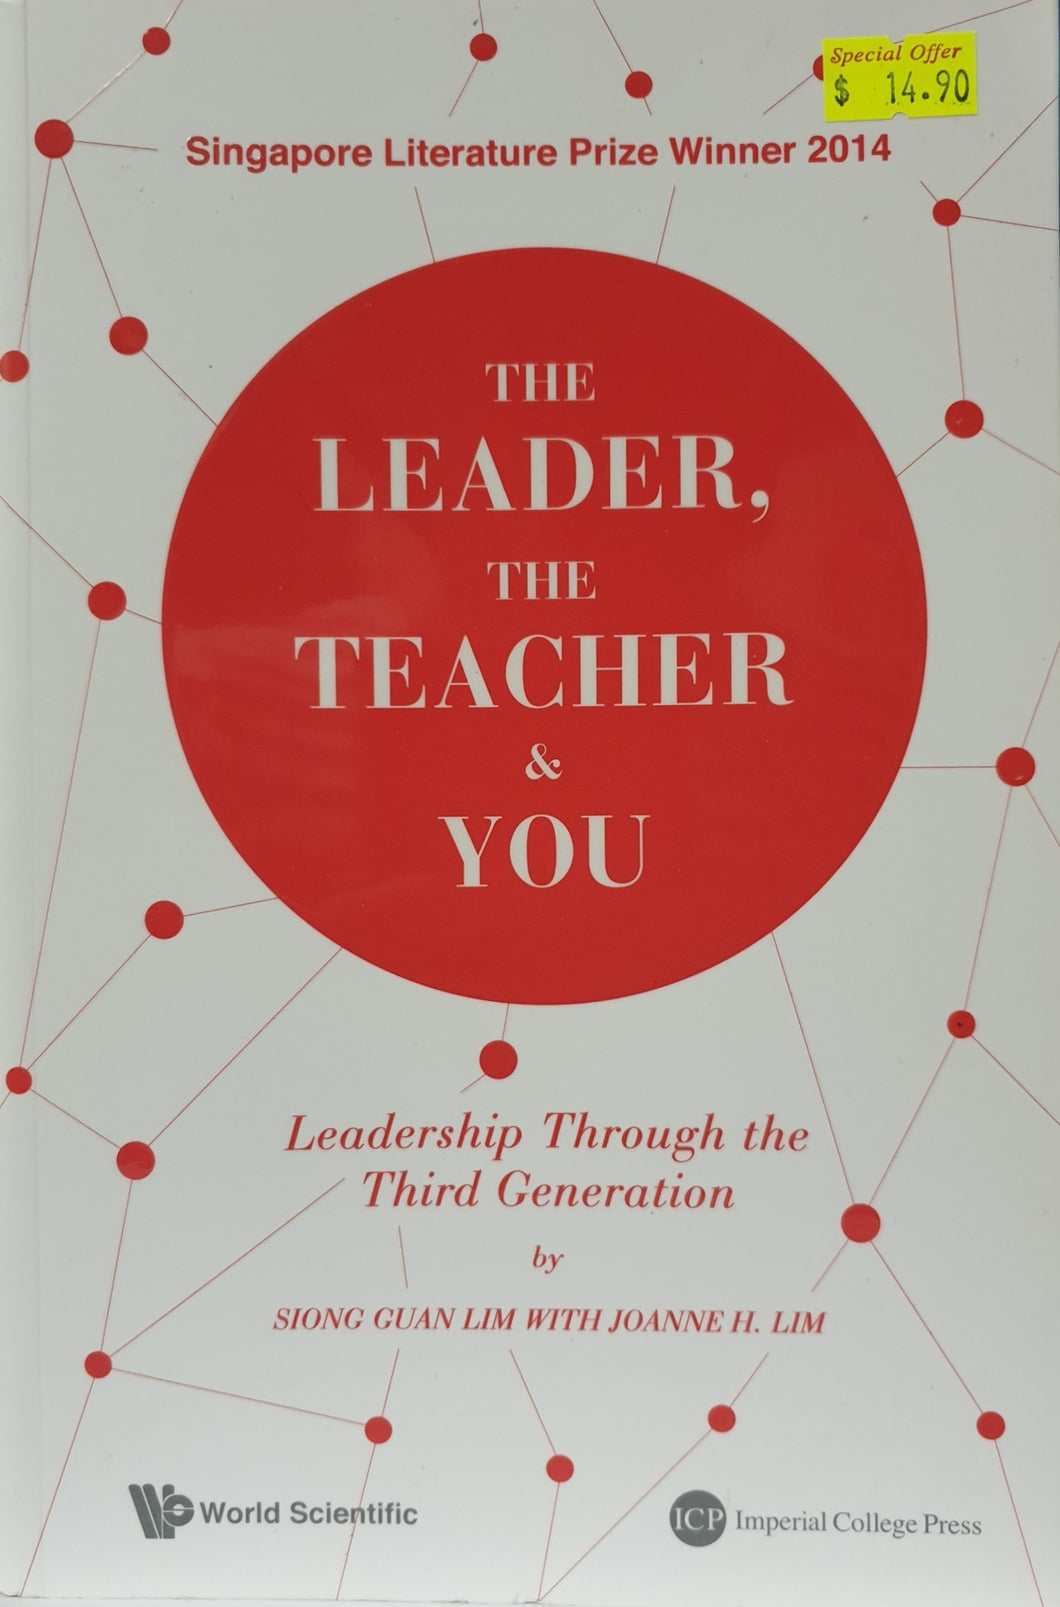 The Leader, The Teacher & You -  Siong Guan Lim & Joanne H. Lim